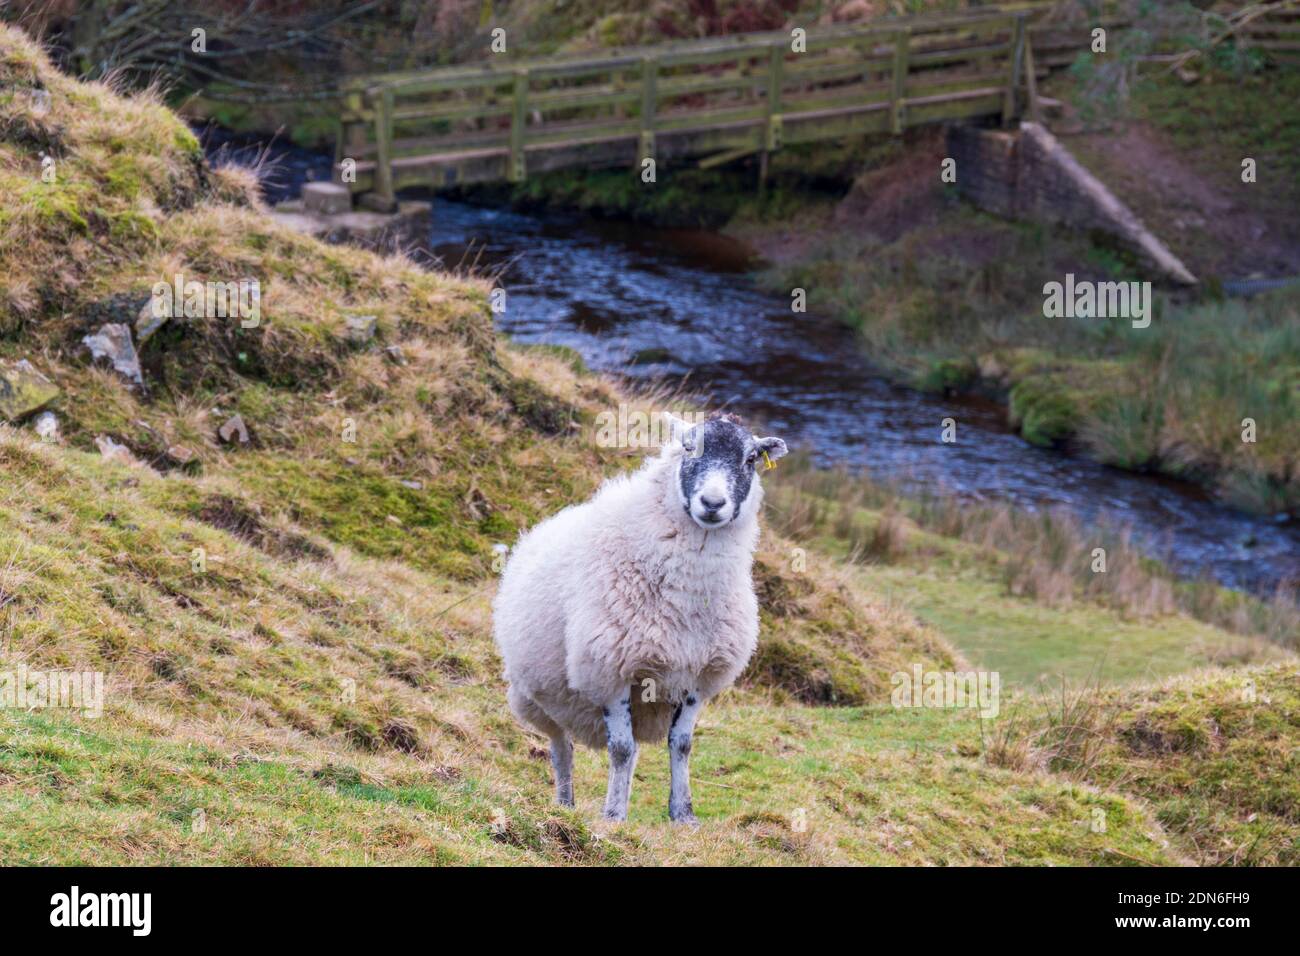 A sheep posing for a picture in front of a bridge in the Alport Valley Stock Photo